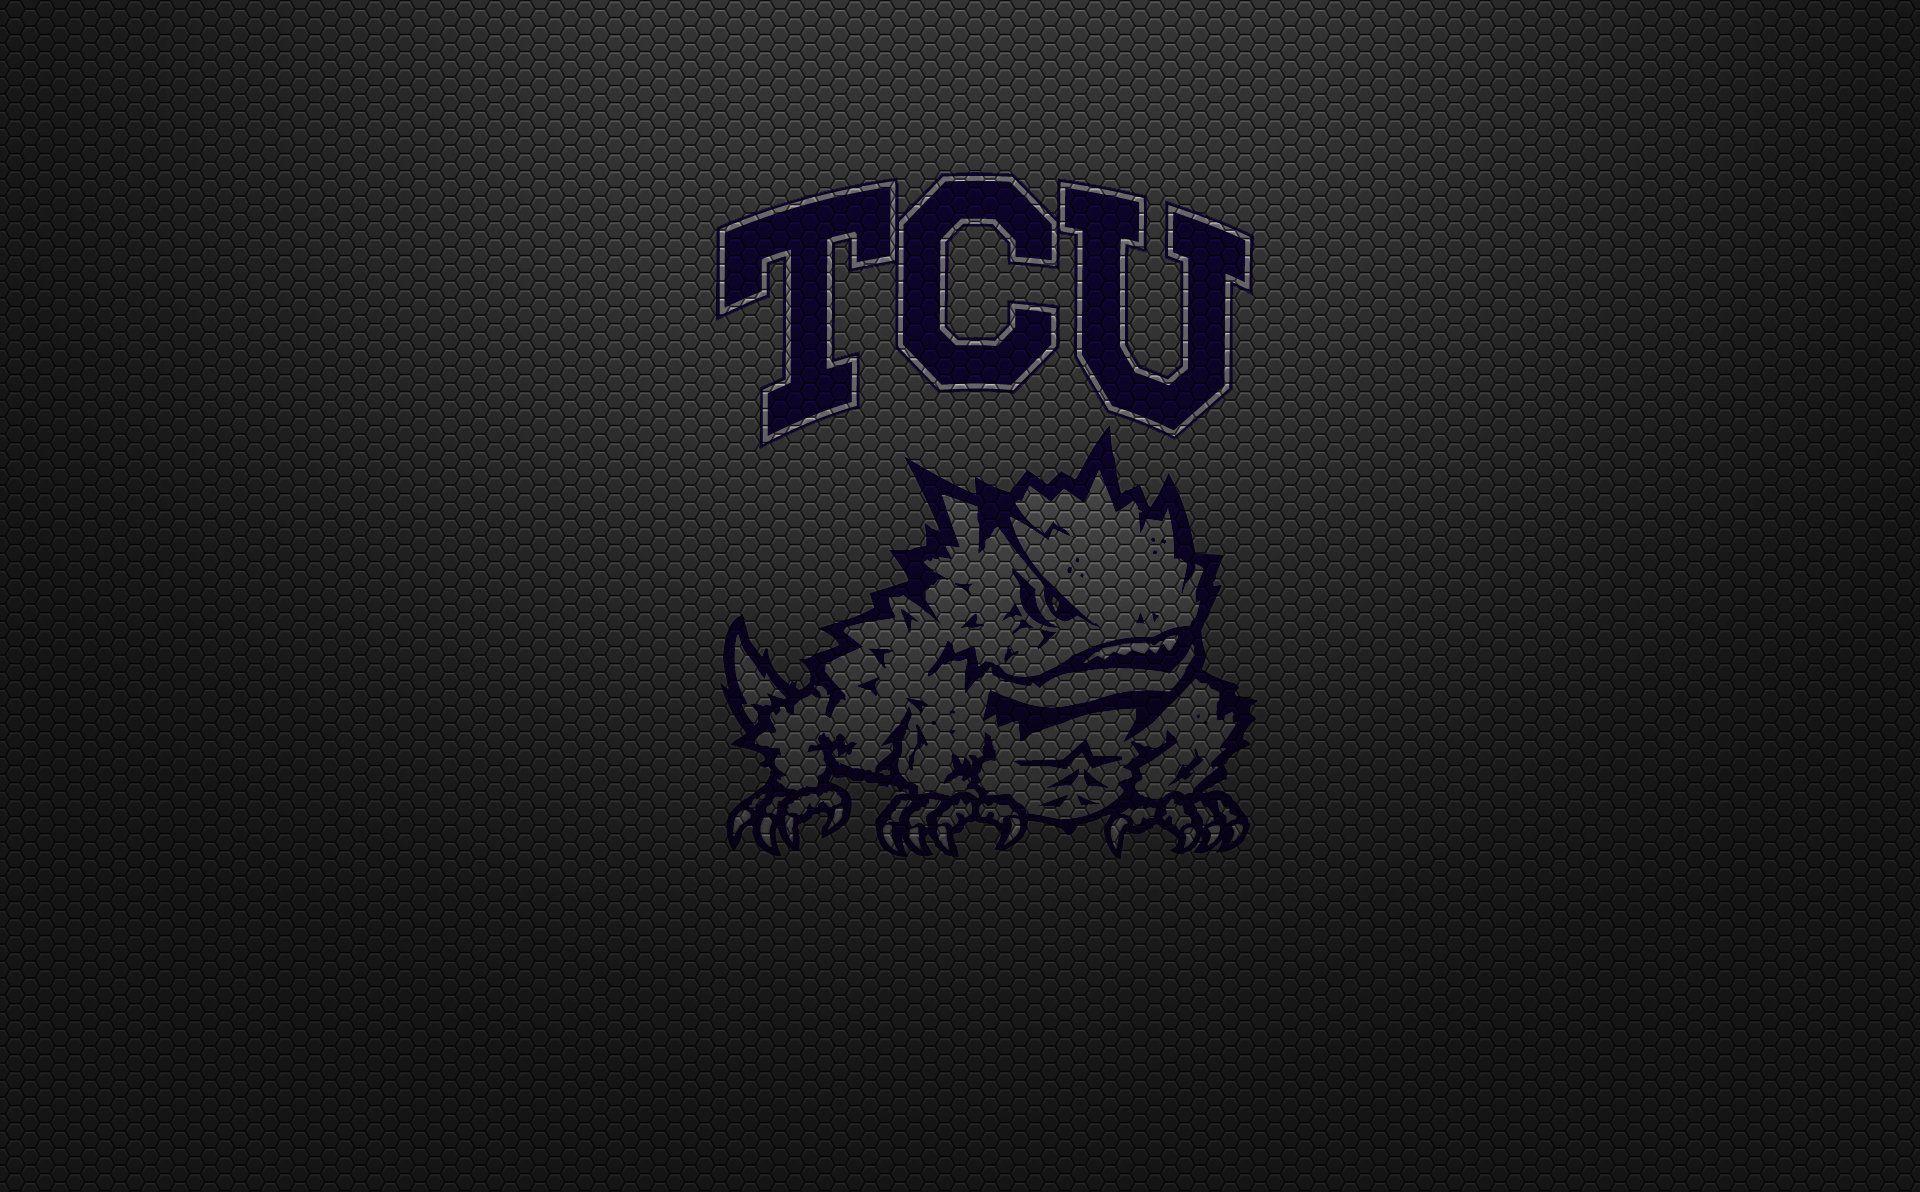 Download wallpapers TCU Horned Frogs American football team purple  background TCU Horned Frogs logo grunge art NCAA American football TCU  Horned Frogs emblem for desktop with resolution 2880x1800 High Quality HD  pictures